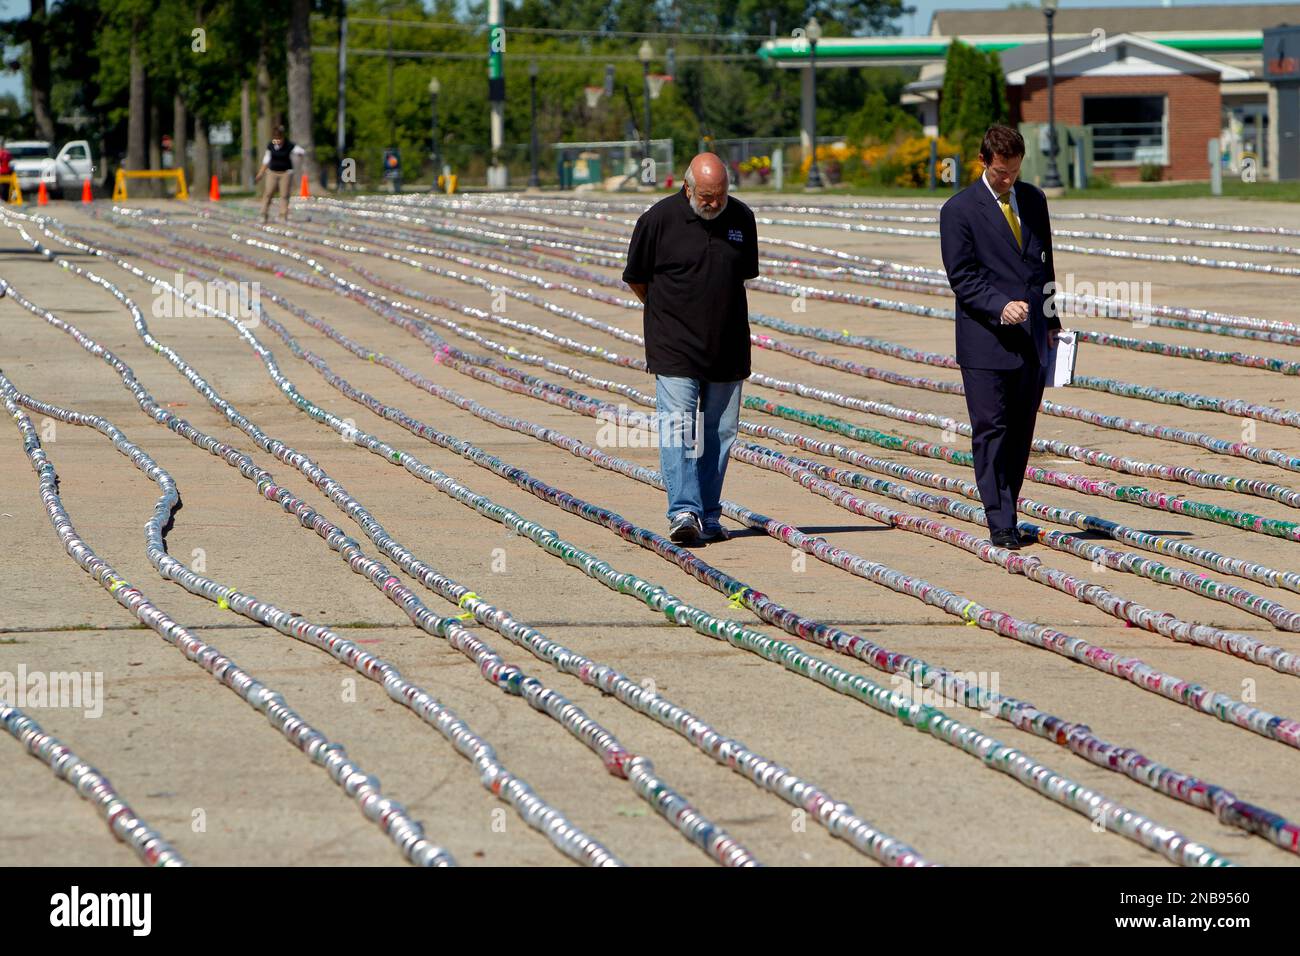 https://c8.alamy.com/comp/2NB9560/philip-robertson-right-an-adjudicator-with-the-guinness-world-record-counts-aluminum-cans-wednesday-sept-7-2011-in-de-pere-wis-in-an-attempt-by-the-aluminum-association-and-joe-cahn-left-the-commissioner-of-tailgating-to-break-the-world-record-for-the-longest-string-of-aluminum-cans-the-record-was-set-with-66343-cans-strung-together-measuring-over-five-miles-in-length-the-event-is-a-kick-off-to-the-can-crusade-a-nationwide-awareness-campaign-to-remind-fans-that-using-aluminum-cans-when-tailgating-is-the-smartest-choice-mike-roemerap-images-for-aluminum-association-2NB9560.jpg